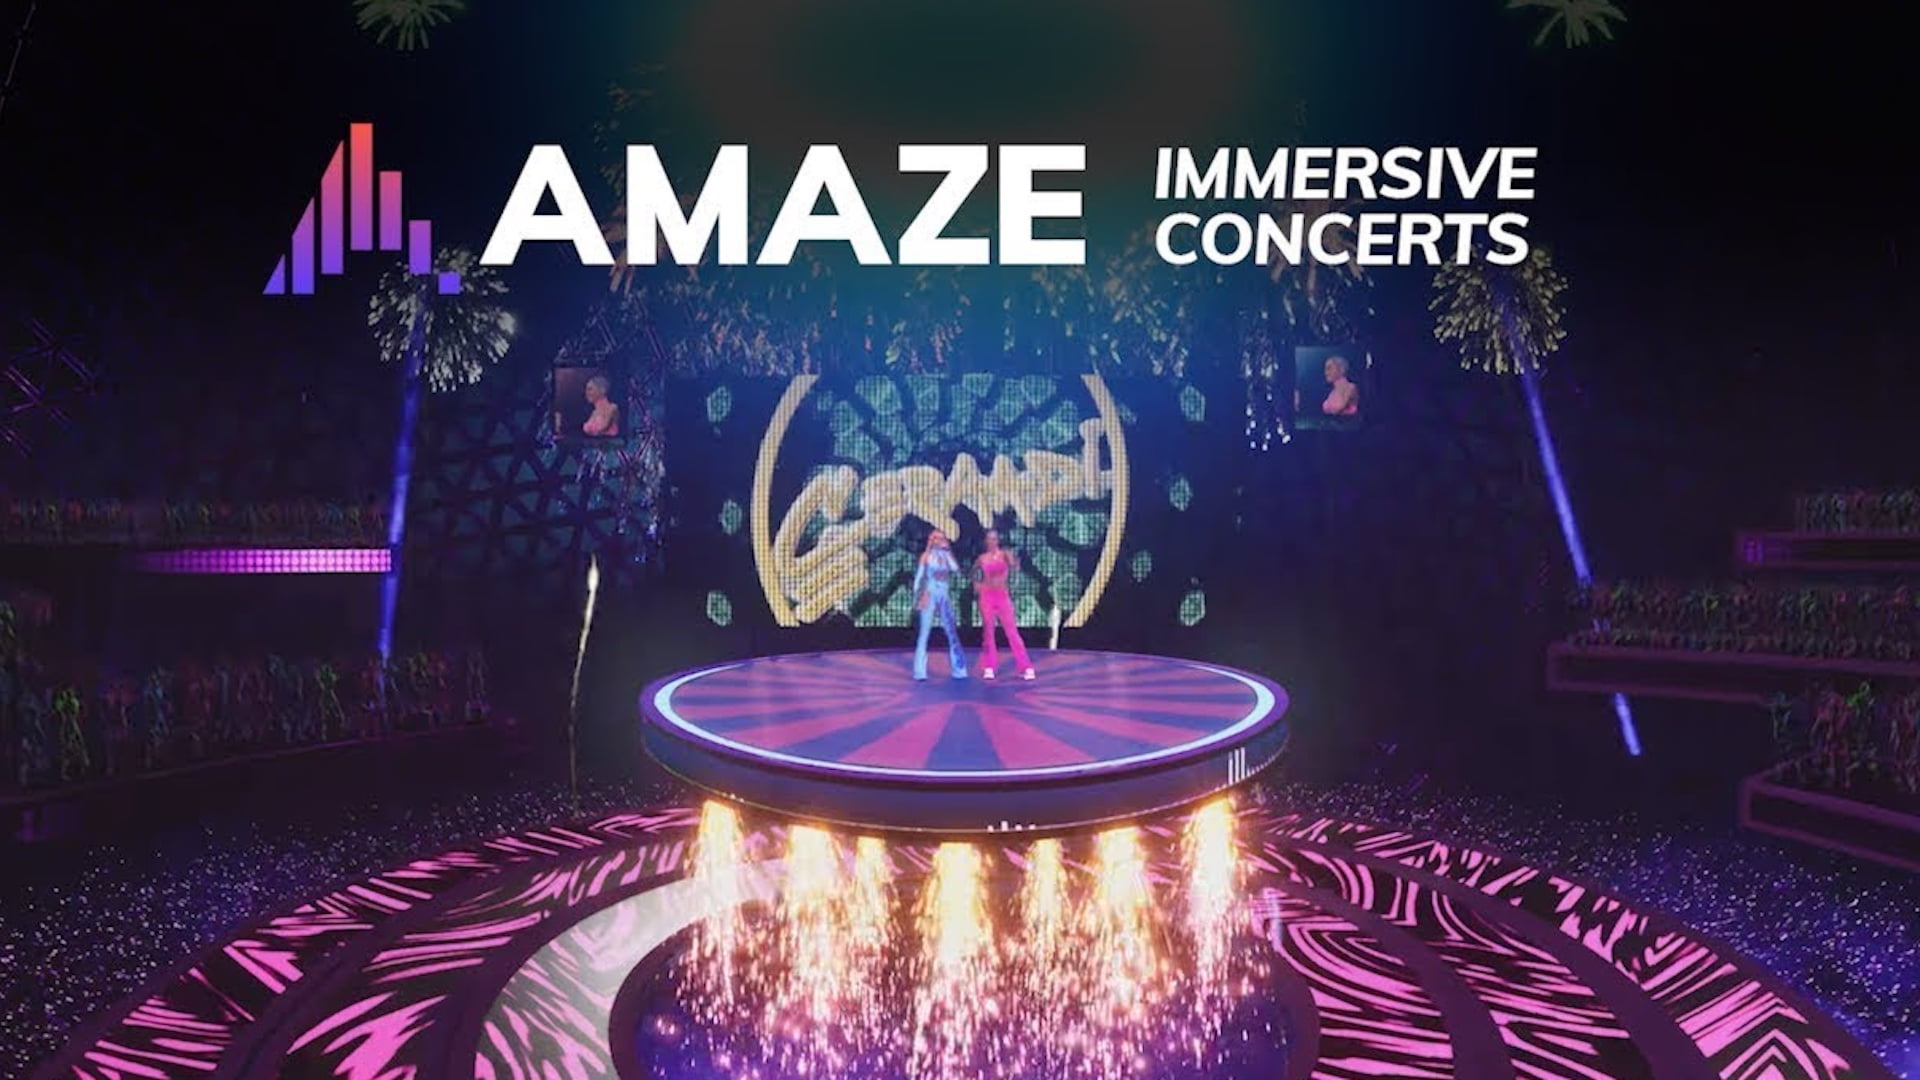 VR concerts and events: What AmazeVR plans for 2023